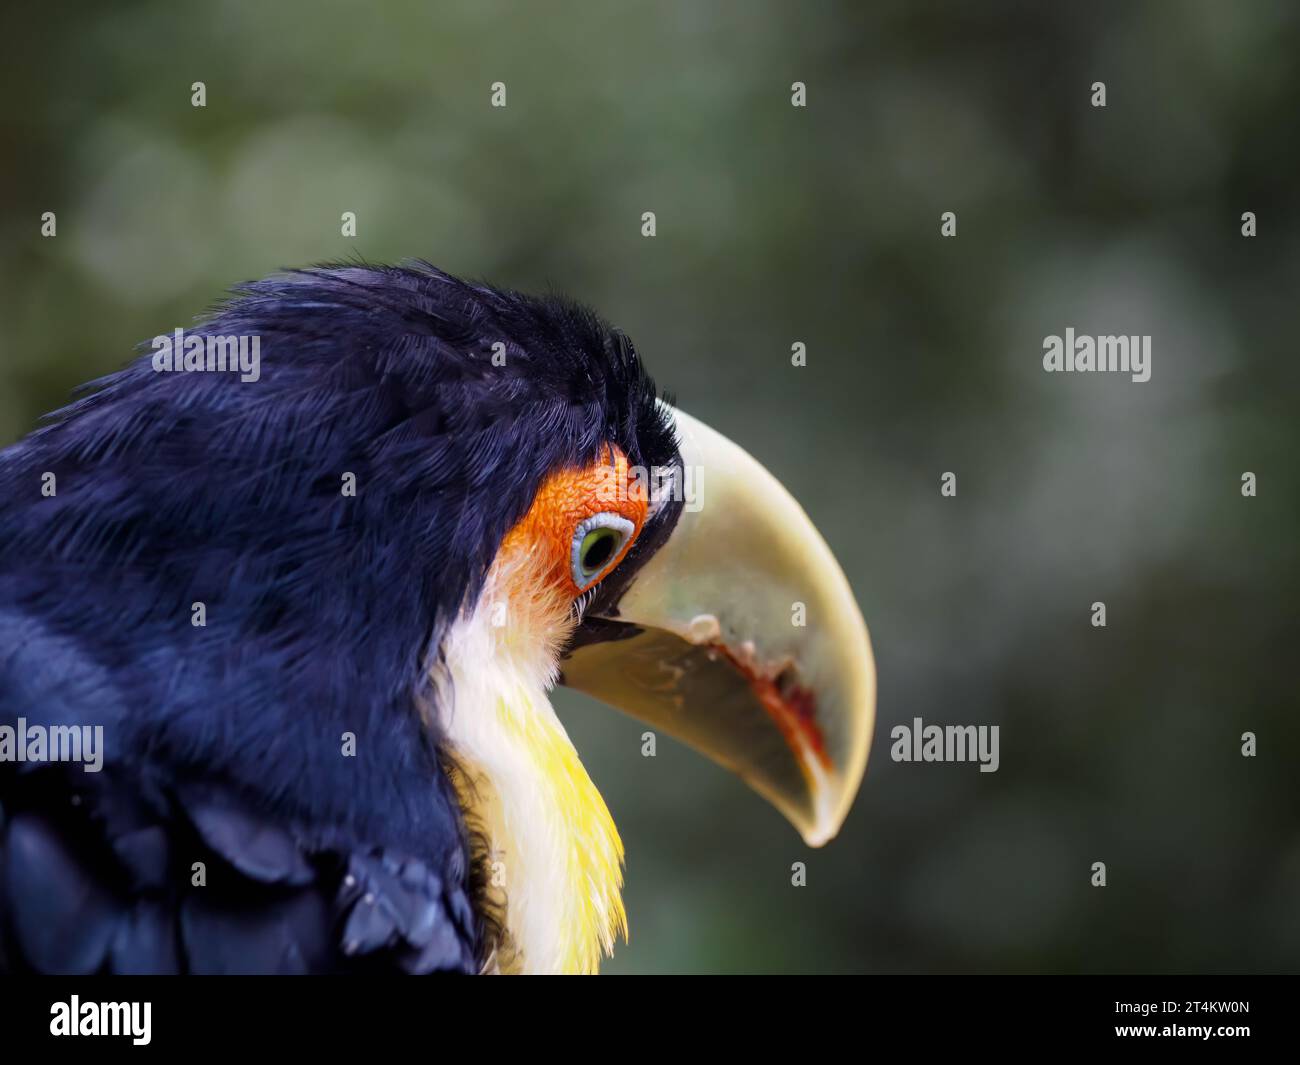 A green billed toucan, looking just a little bit sad. Stock Photo